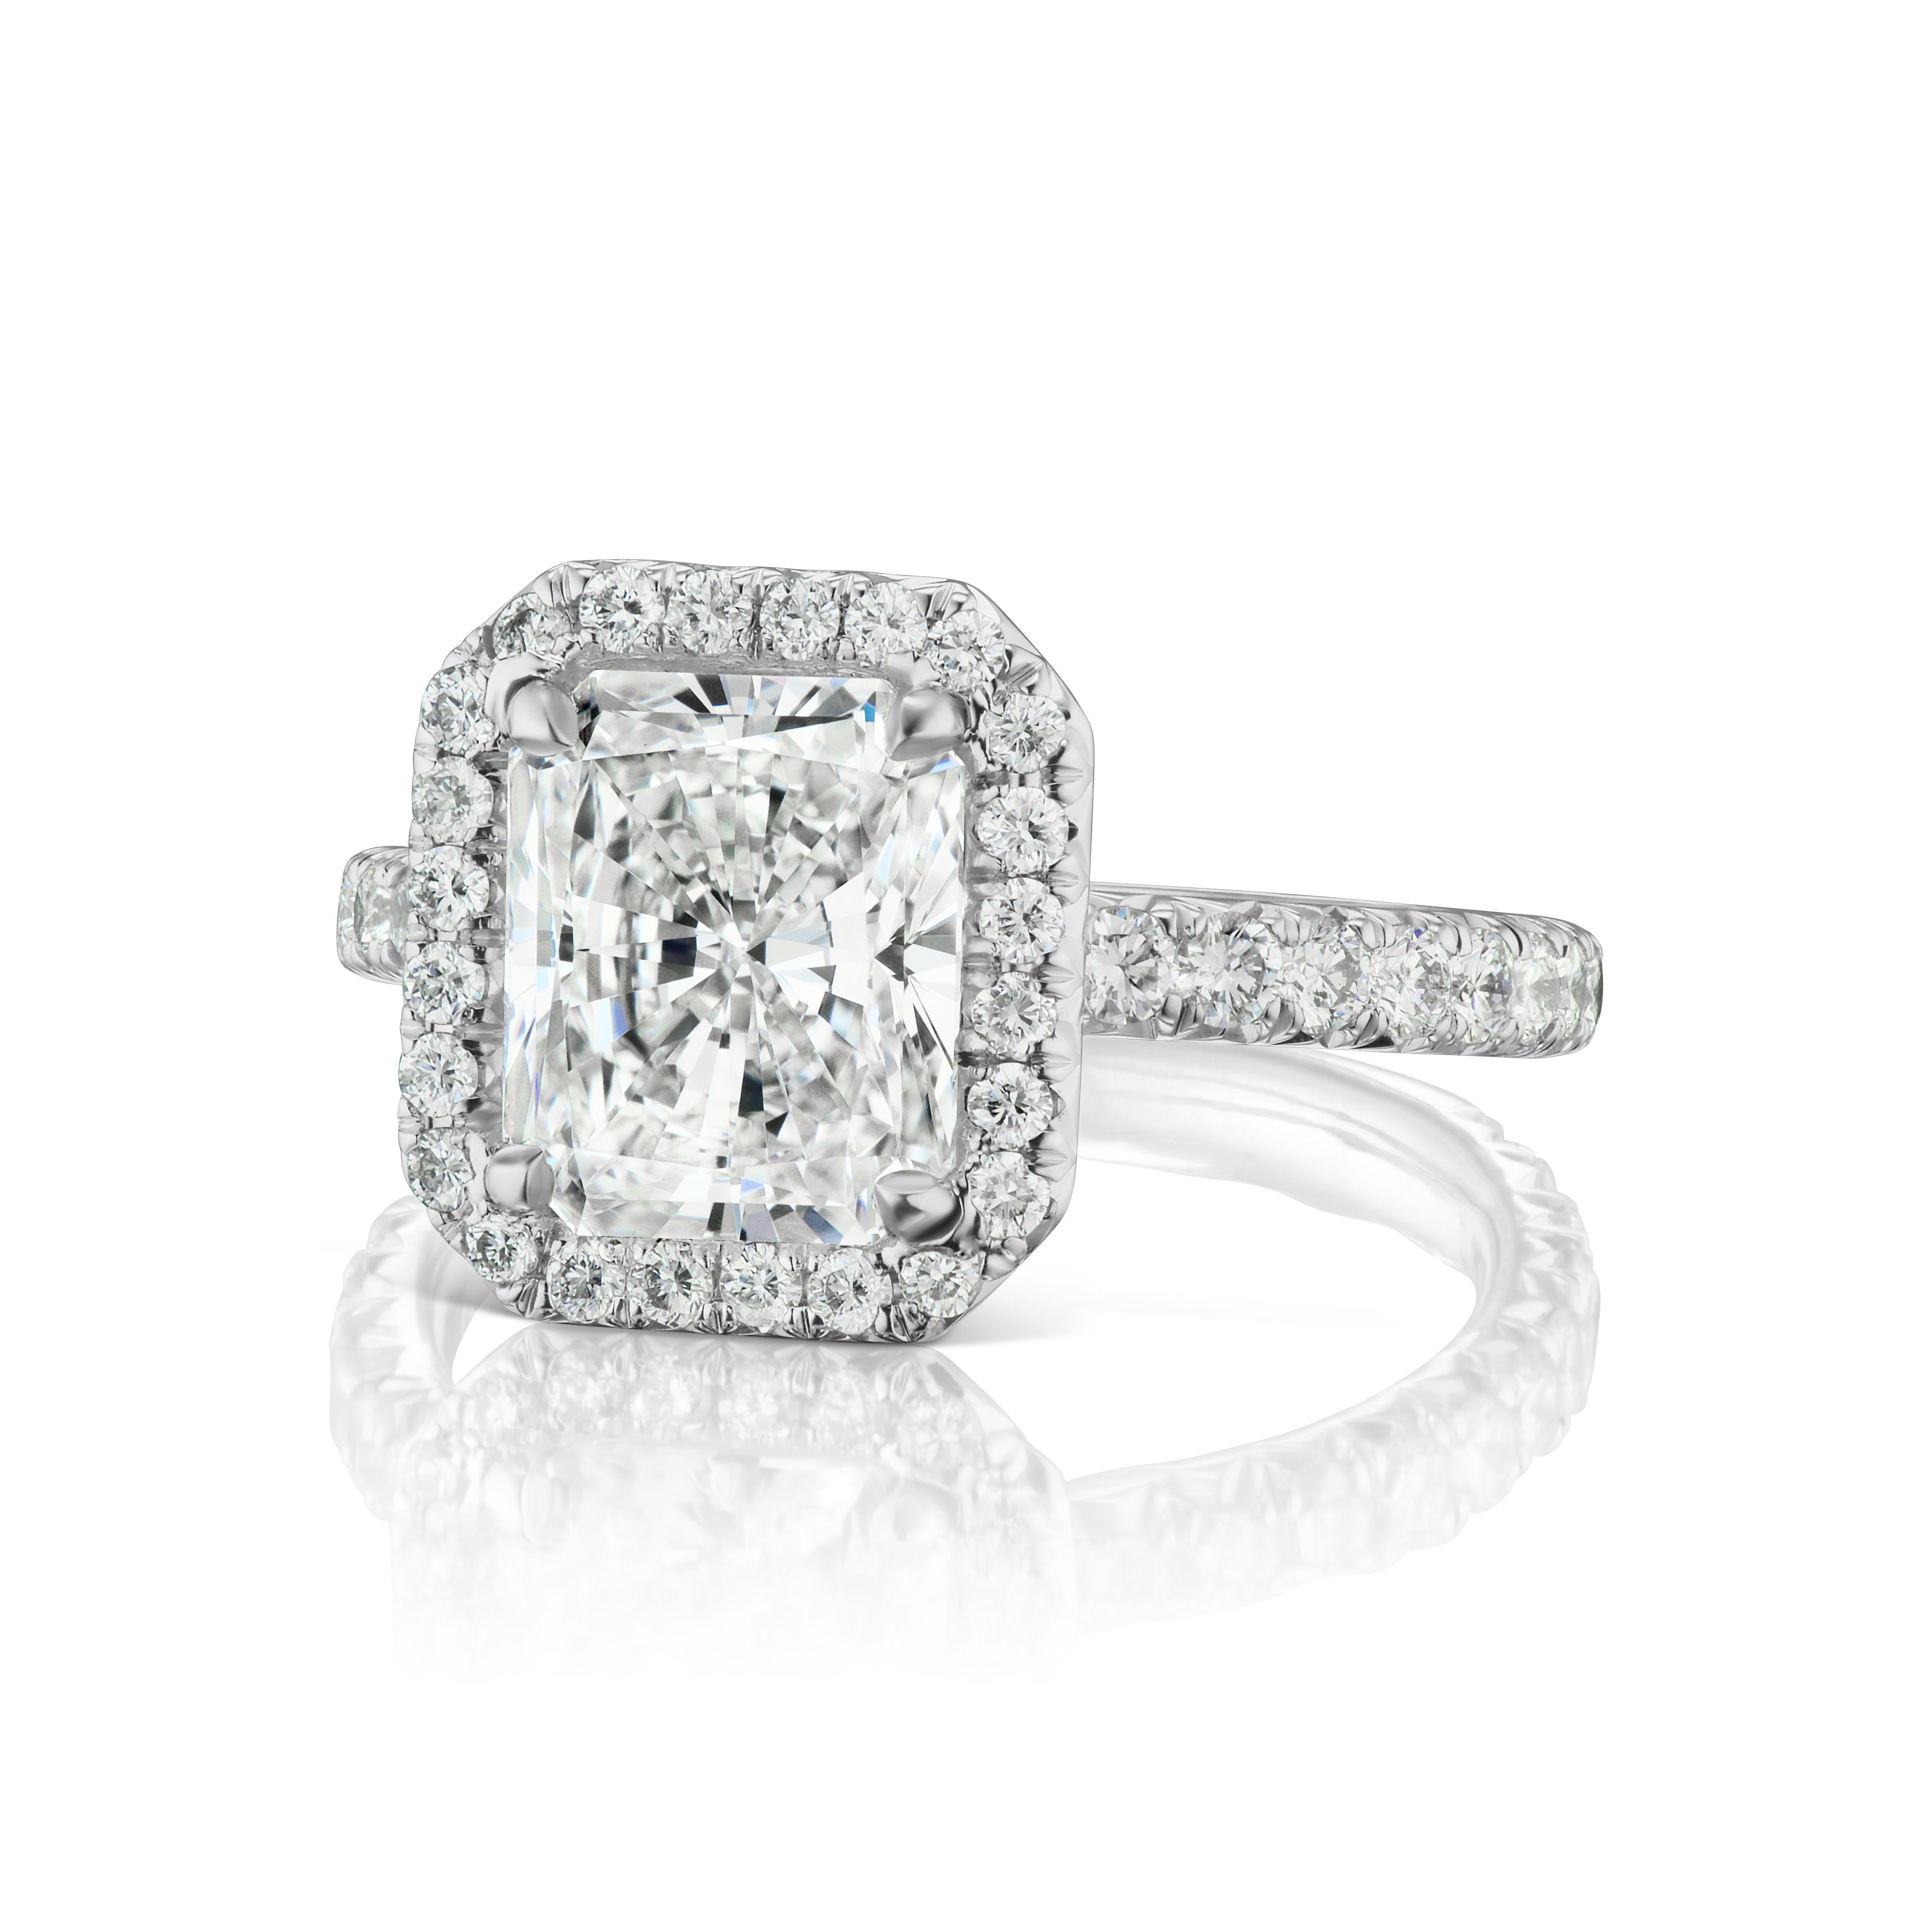 This stunning 2.21 ct. GVS2 GIA Certified Radiant Cut in set in a platinum diamond halo .48 ct. total weight of matching diamond melee enrich the center stones natural beauty.  The ring is a size 4 and can easily be resized. If you don't see